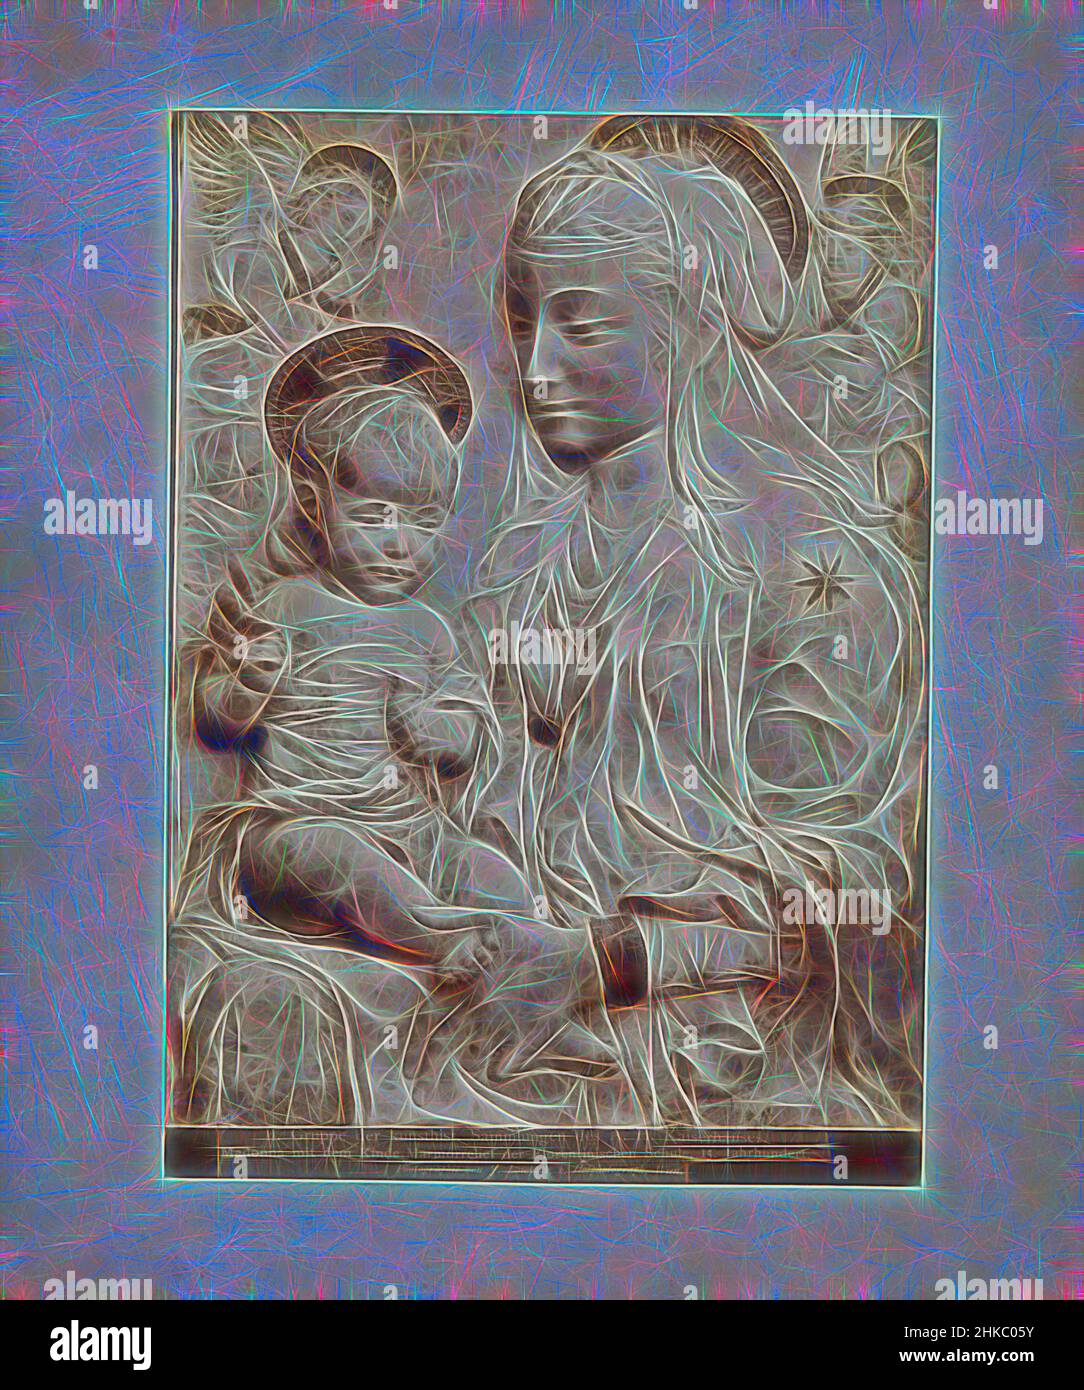 Inspired by Relief of Mary with Child, Madonna mit dem Kinde. Marmorrelief der Florentinischen Schule, 15. Jahrhundert, Josef Löwy, Europe, c. 1875 - c. 1900, albumen print, height 263 mm × width 187 mm, Reimagined by Artotop. Classic art reinvented with a modern twist. Design of warm cheerful glowing of brightness and light ray radiance. Photography inspired by surrealism and futurism, embracing dynamic energy of modern technology, movement, speed and revolutionize culture Stock Photo